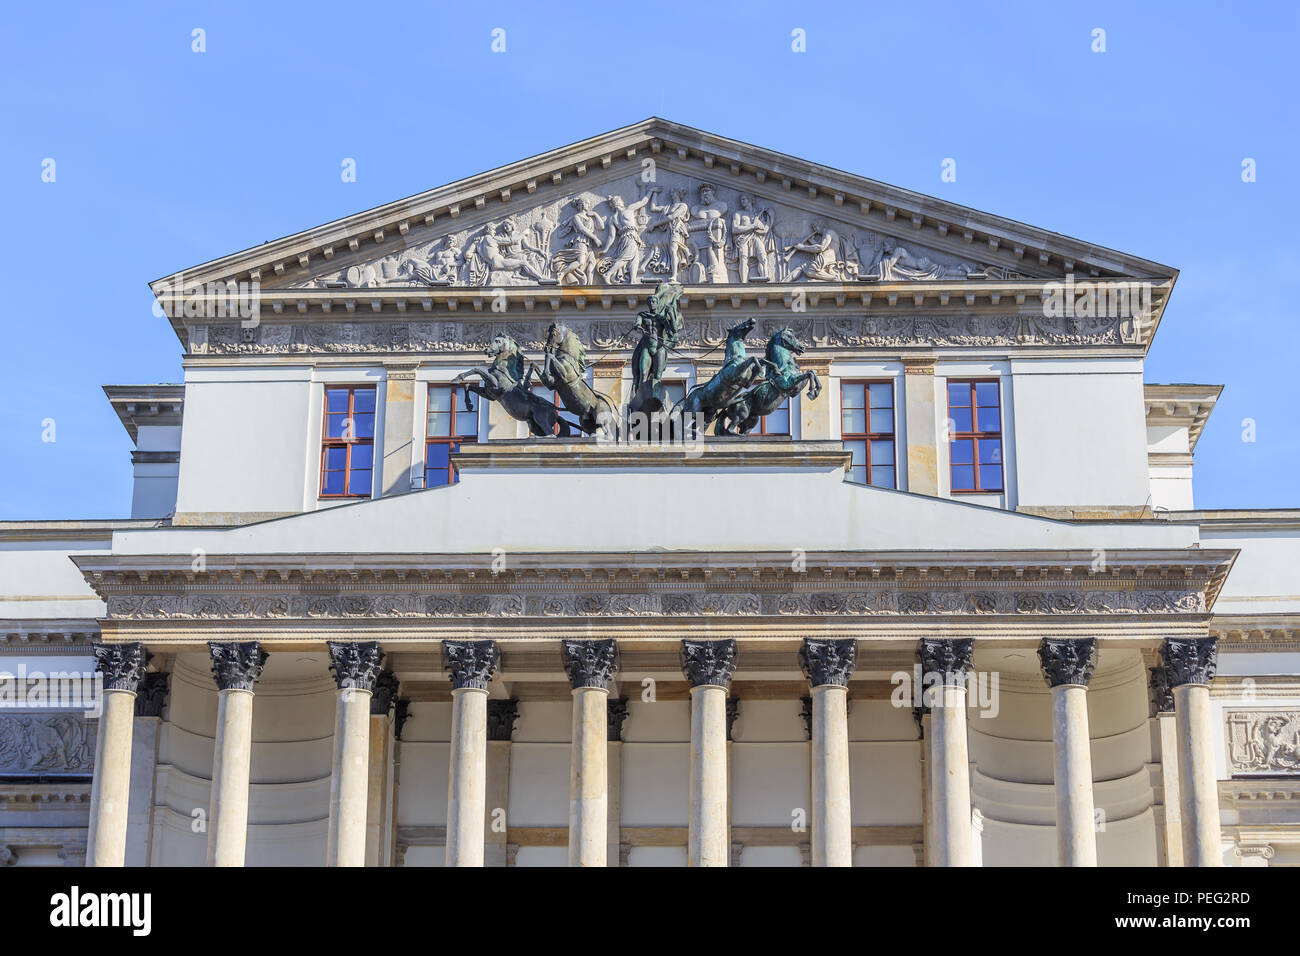 A fragment of classicism facade over entrance to Warsaw Grand Theater. Tympanum is sculpture of Anakreont & three muse chisels by Tomasz Accardi Stock Photo